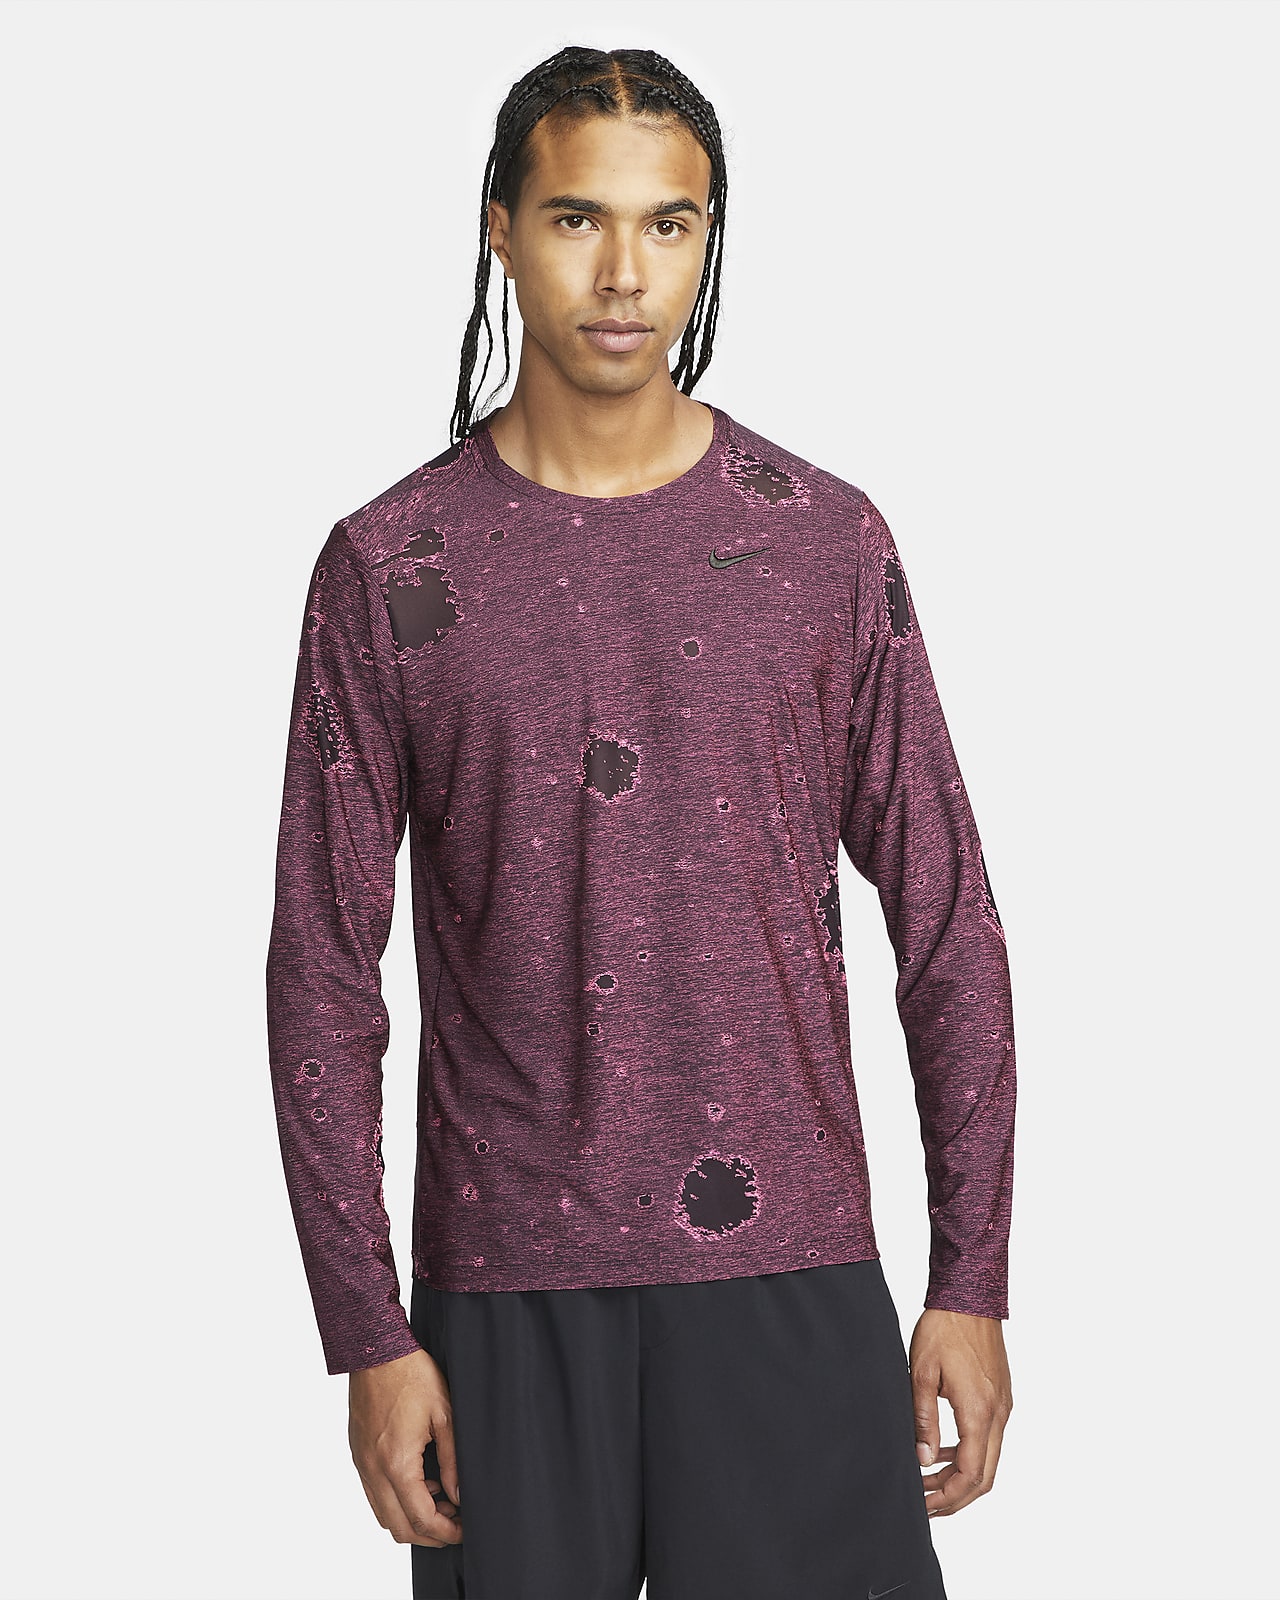 Nike Dri-FIT Men's Long-sleeve All-over Print Fitness Top